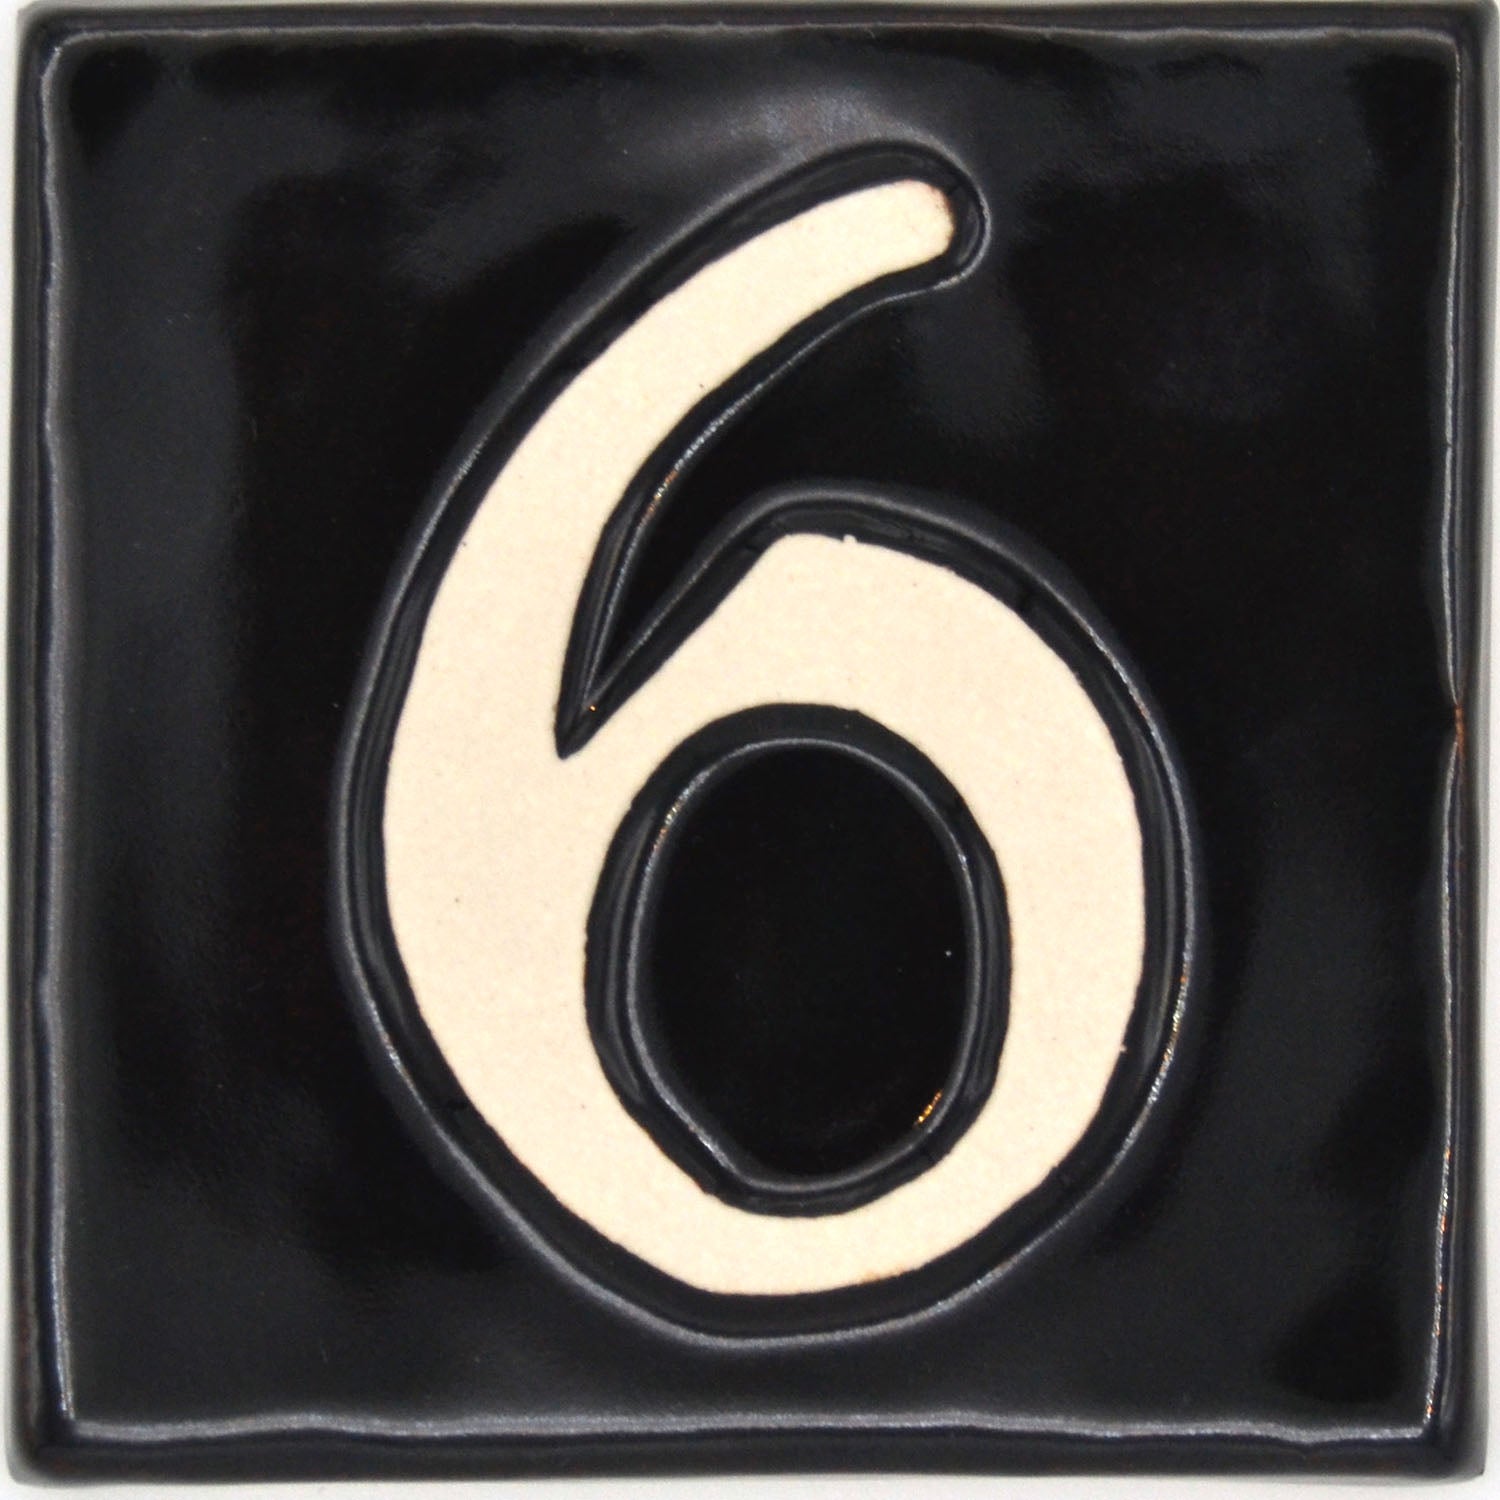 4x4 house number 6